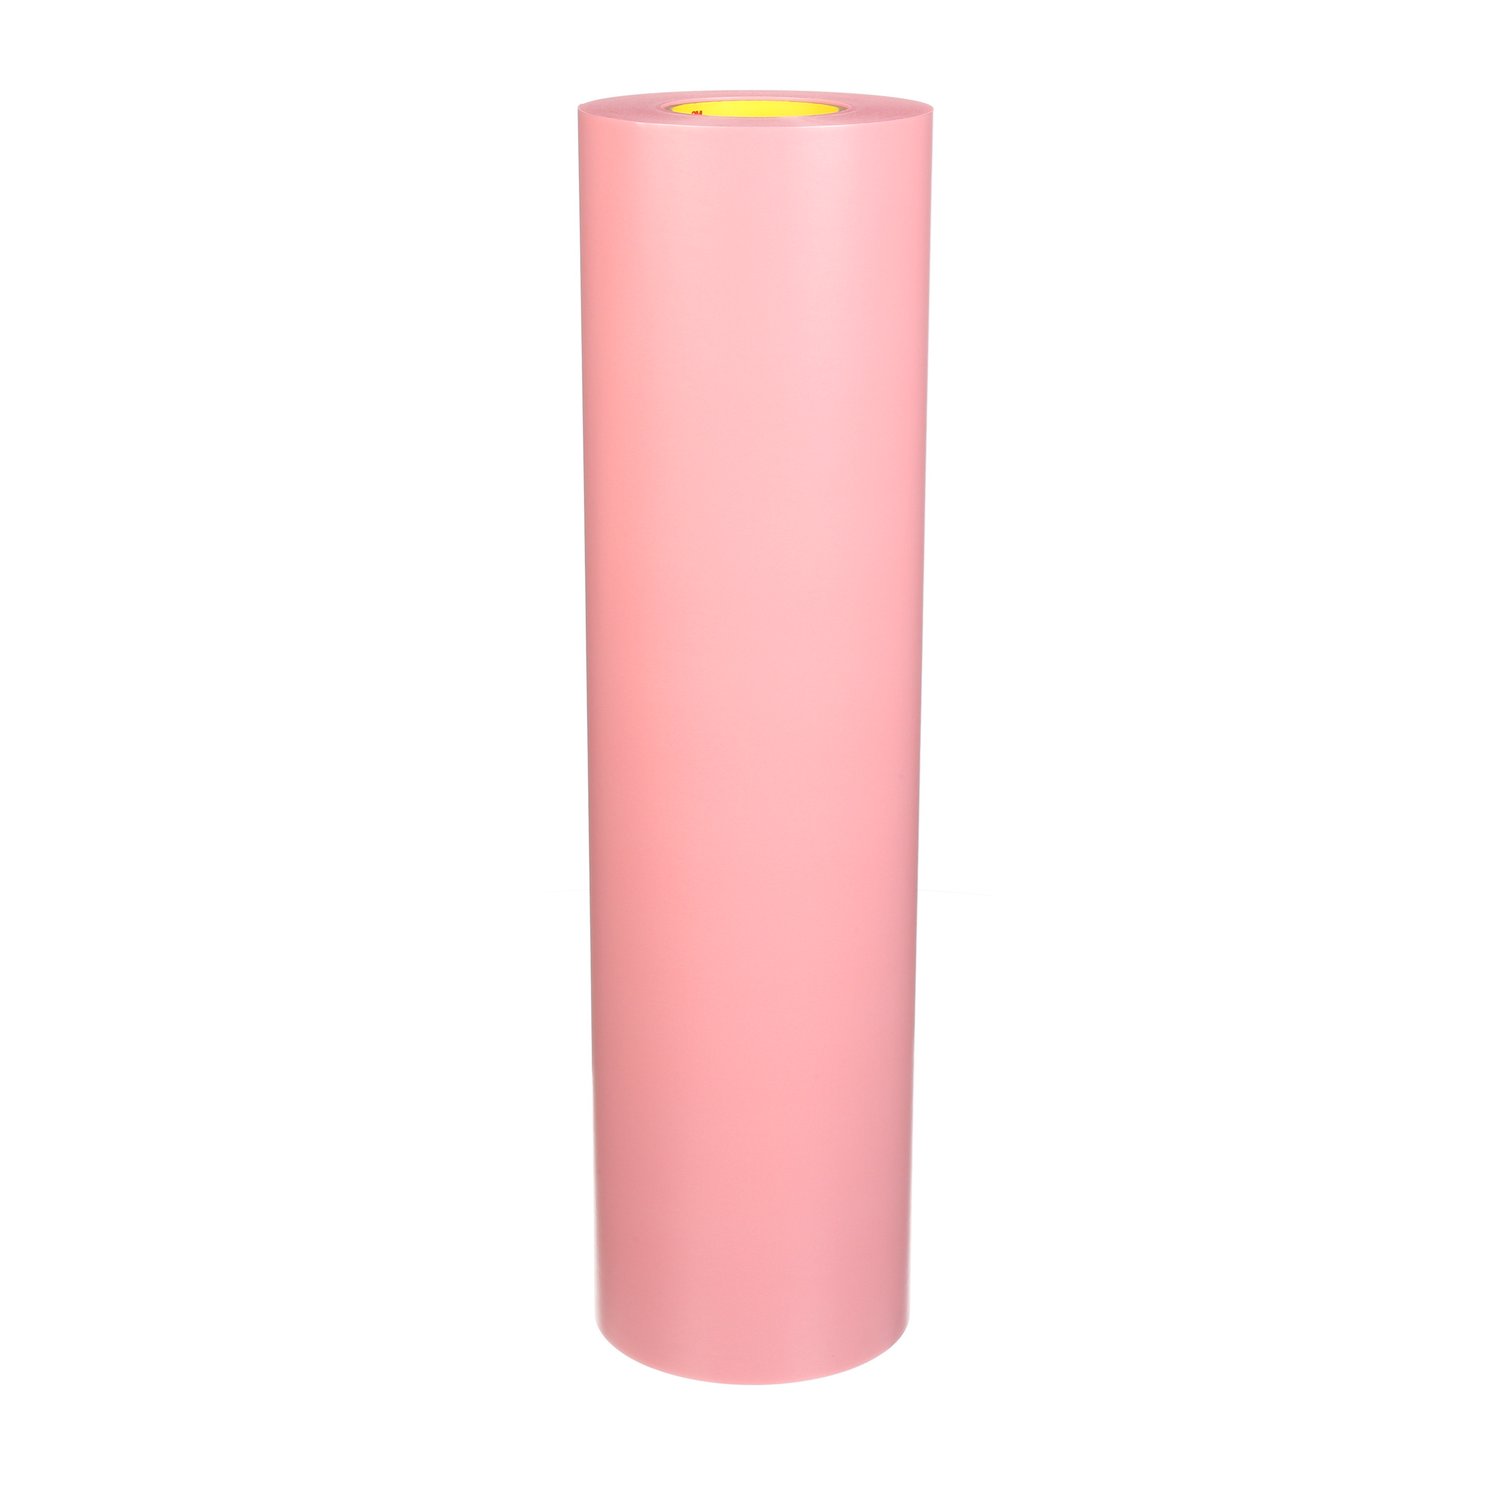 7000124288 - 3M Cushion-Mount Plus Plate Mounting Tape E1920HS, Pink, 54 in x 25
yd, 20 mil, 1 roll per case